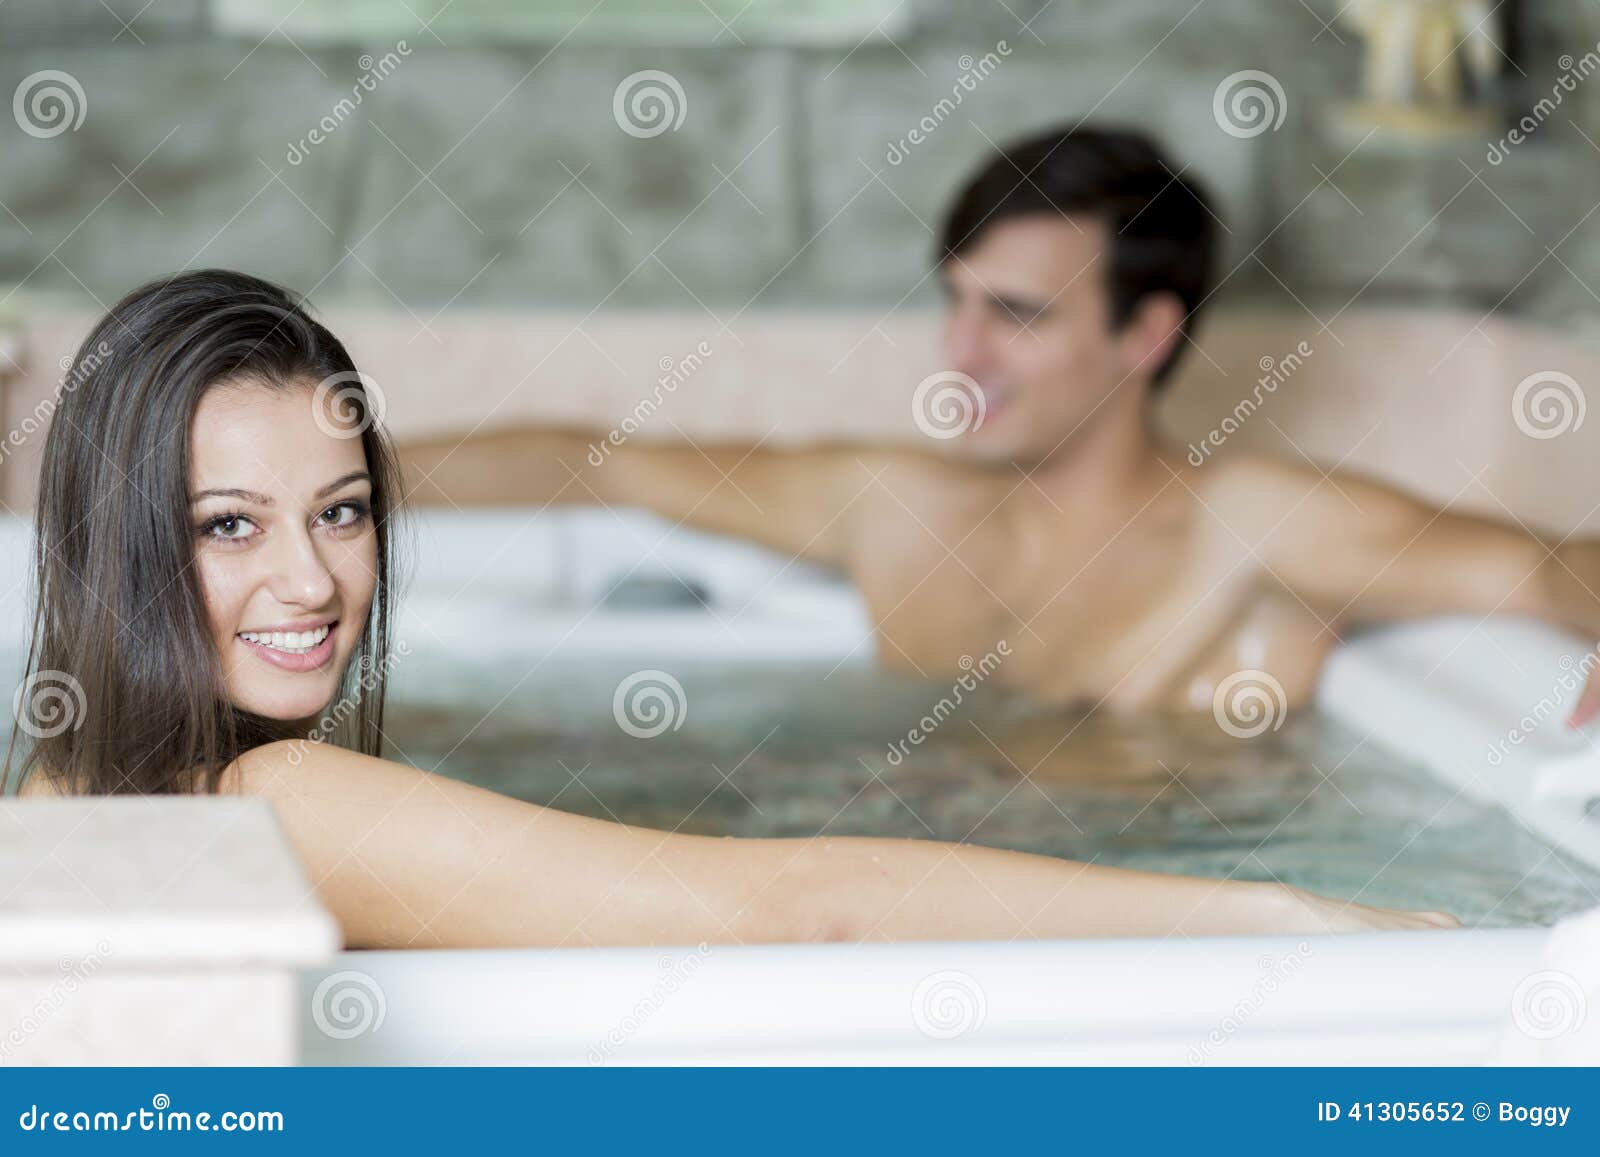 Young Couple Relaxing In Hot Tub Stock Photo Image Of Bathroom